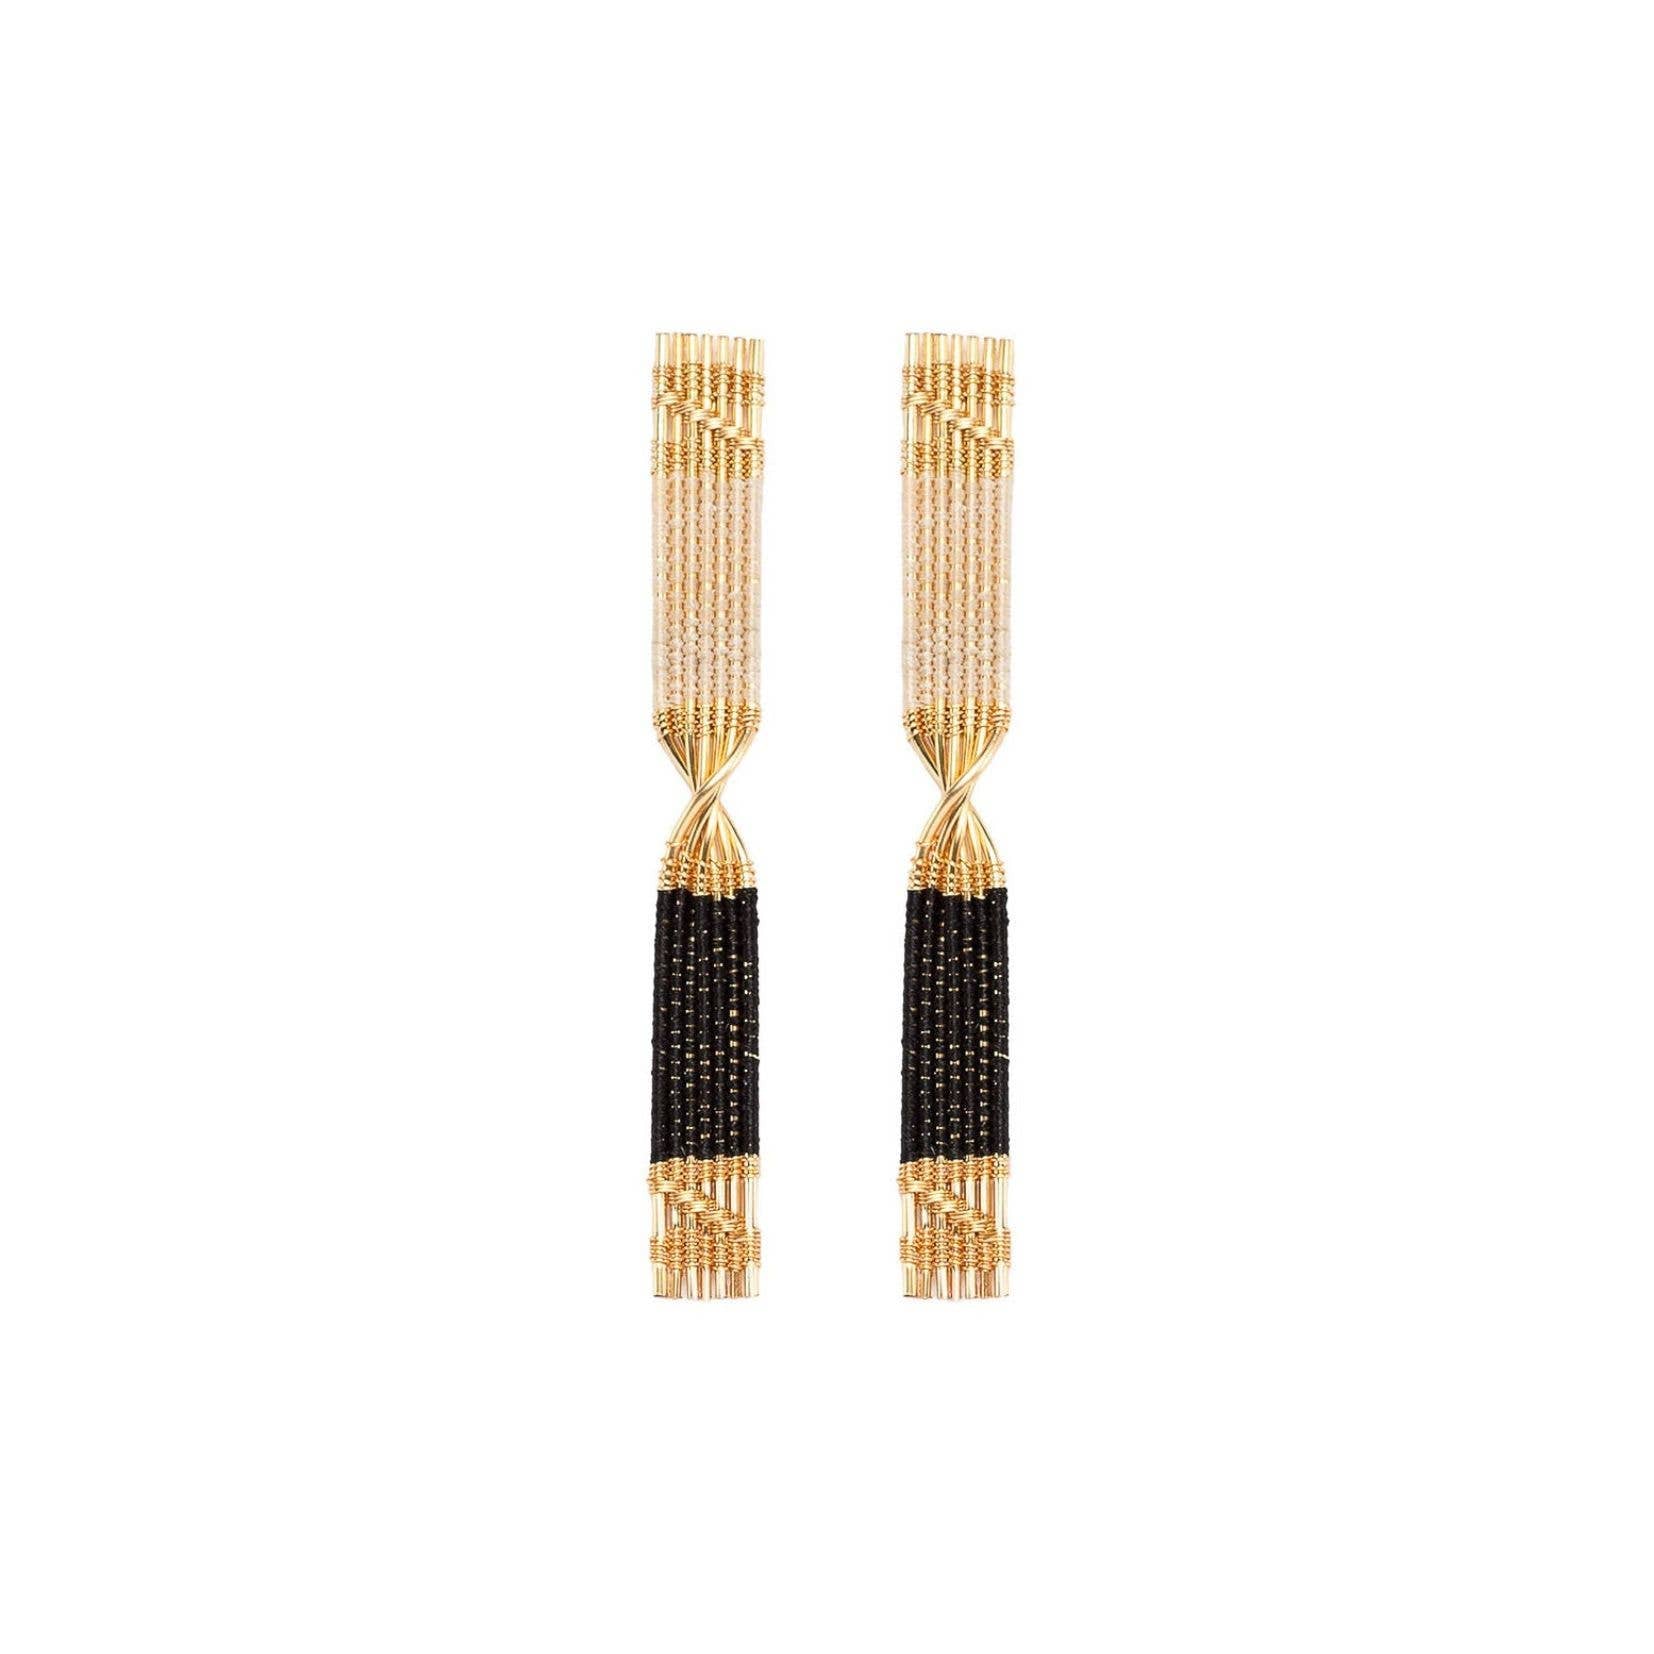 Mayana Designs Co - Handwoven Twisted Wire and Cord Rectangles Earrings (Cream/Black)